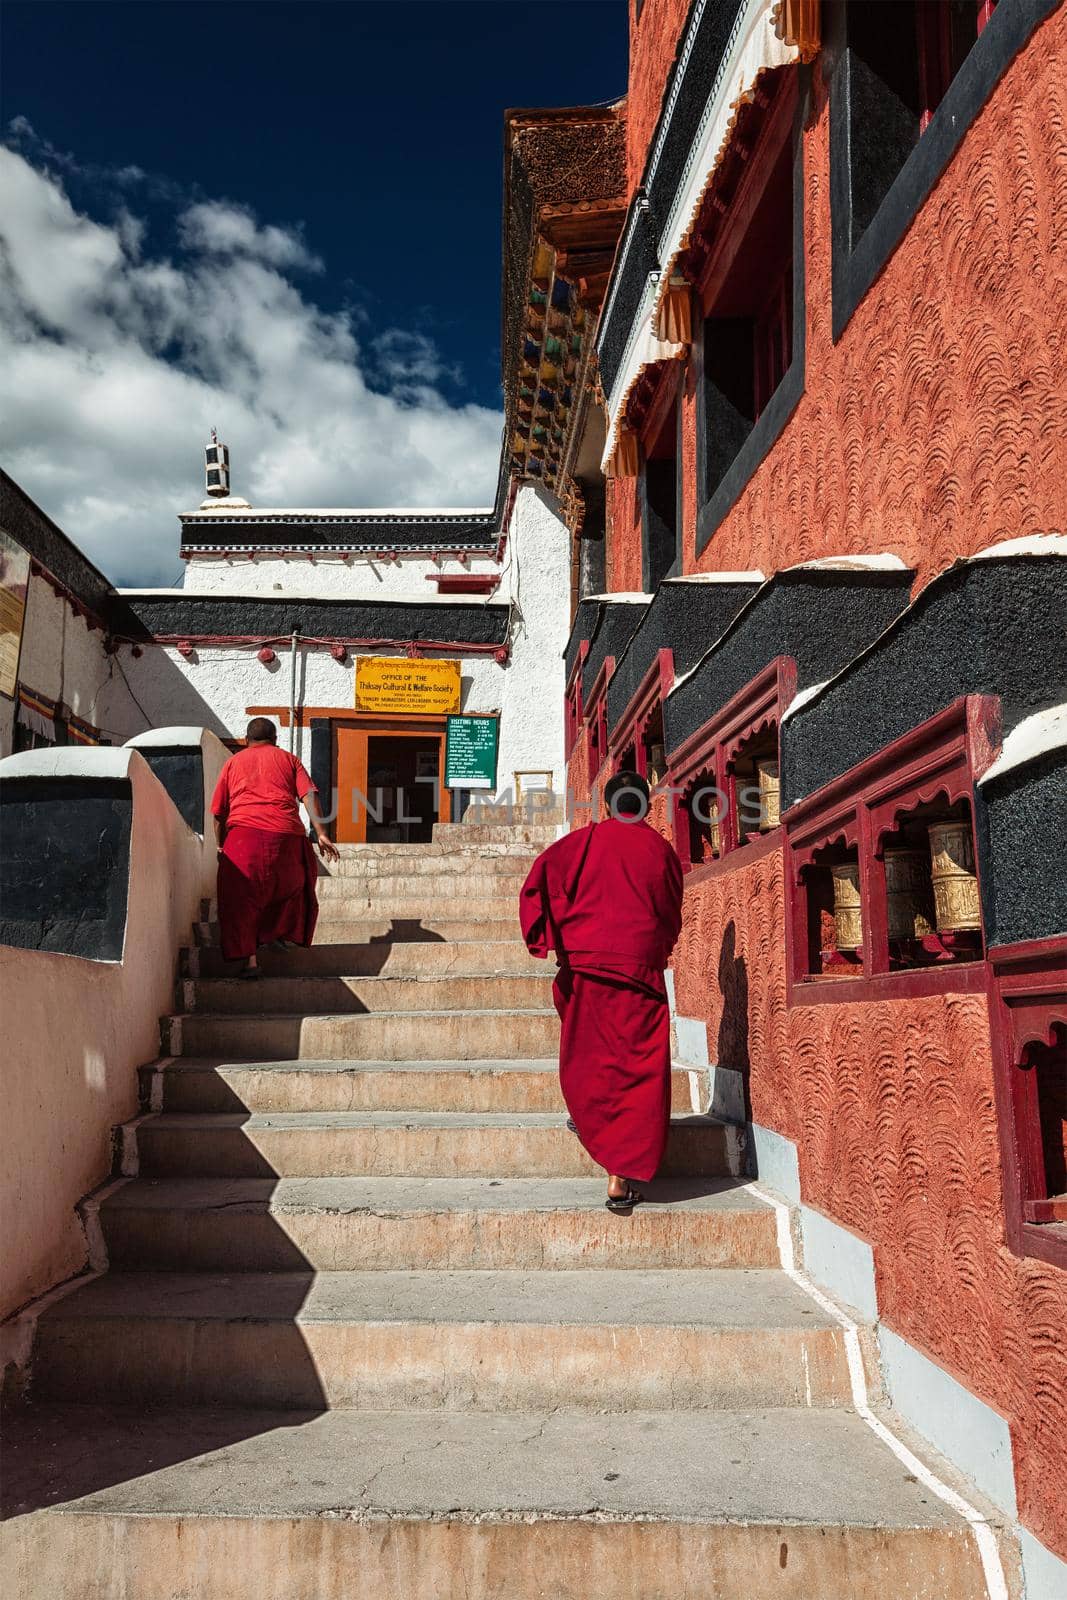 THIKSEY, INDIA - SEPTEMBER 13, 2012: Young Buddhist monks walking on stairs along prayer wheels in Thiksey gompa Tibetan Buddhist monastery, Ladakh, India